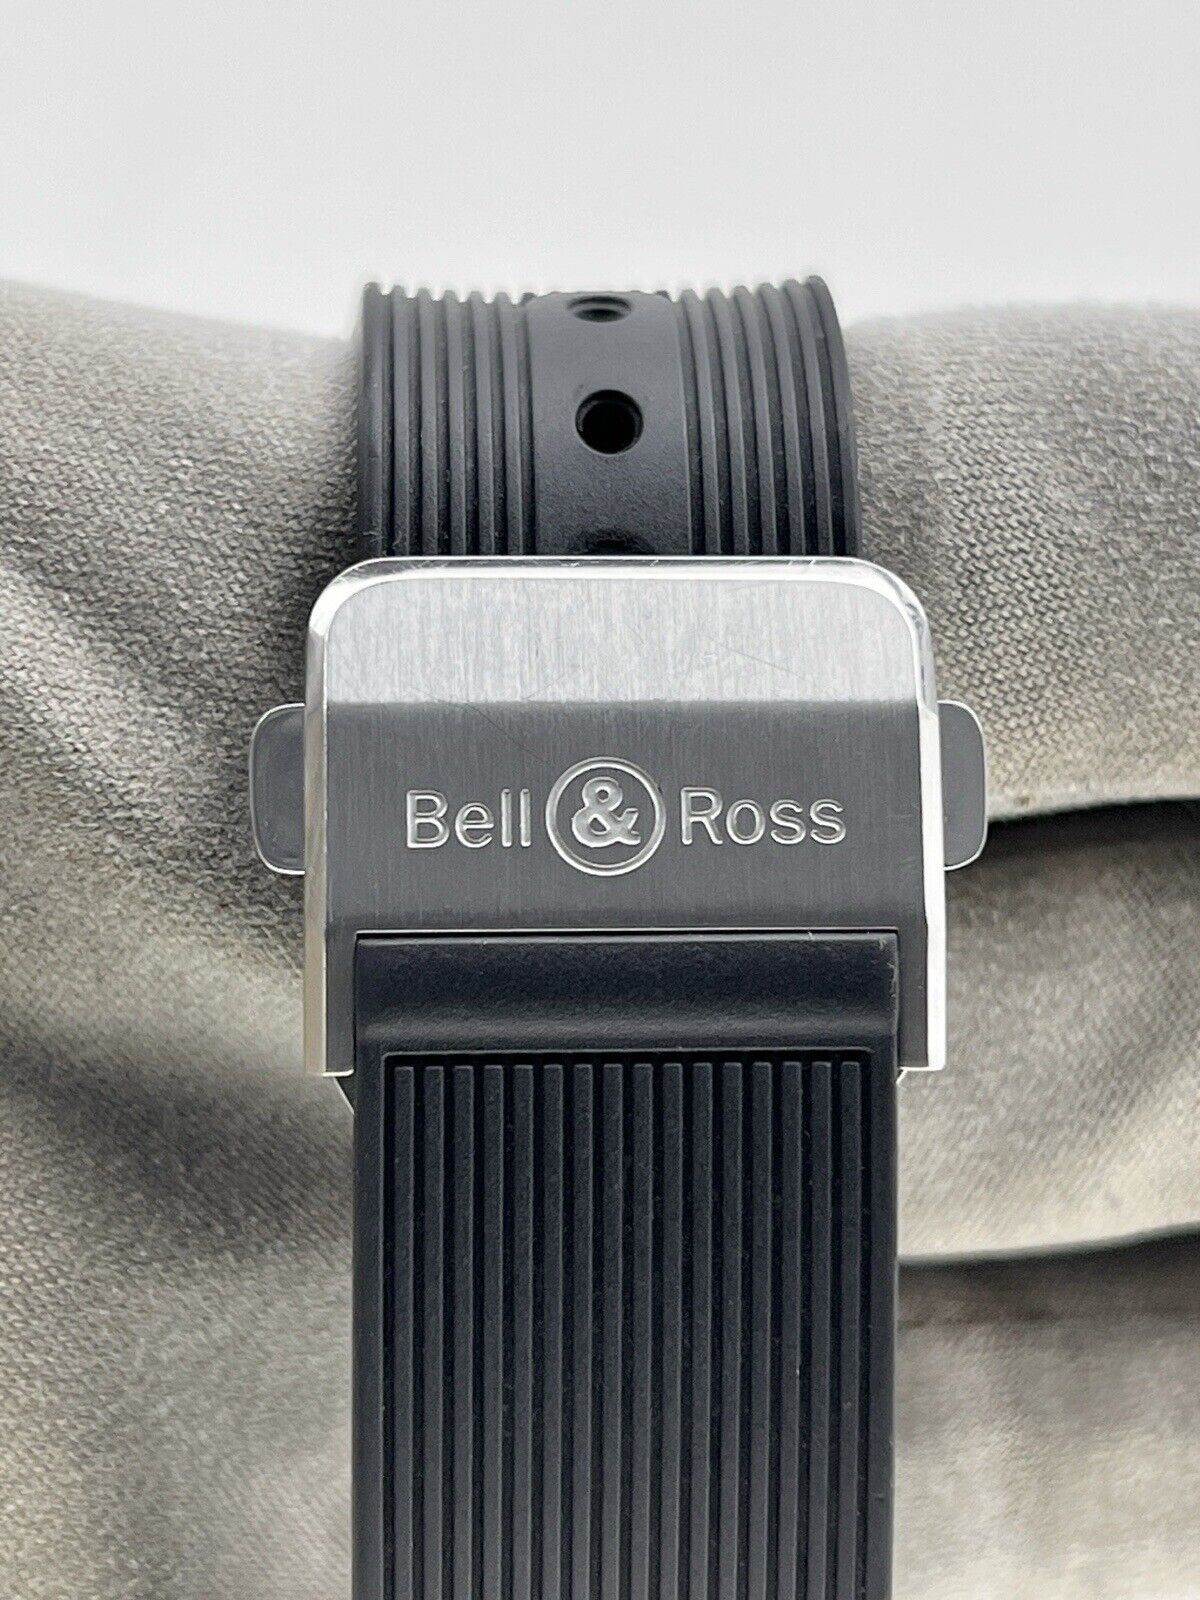 2021 Bell & Ross BR05 Automatic 40mm Black Dial Stainless Steel -Box And Papers